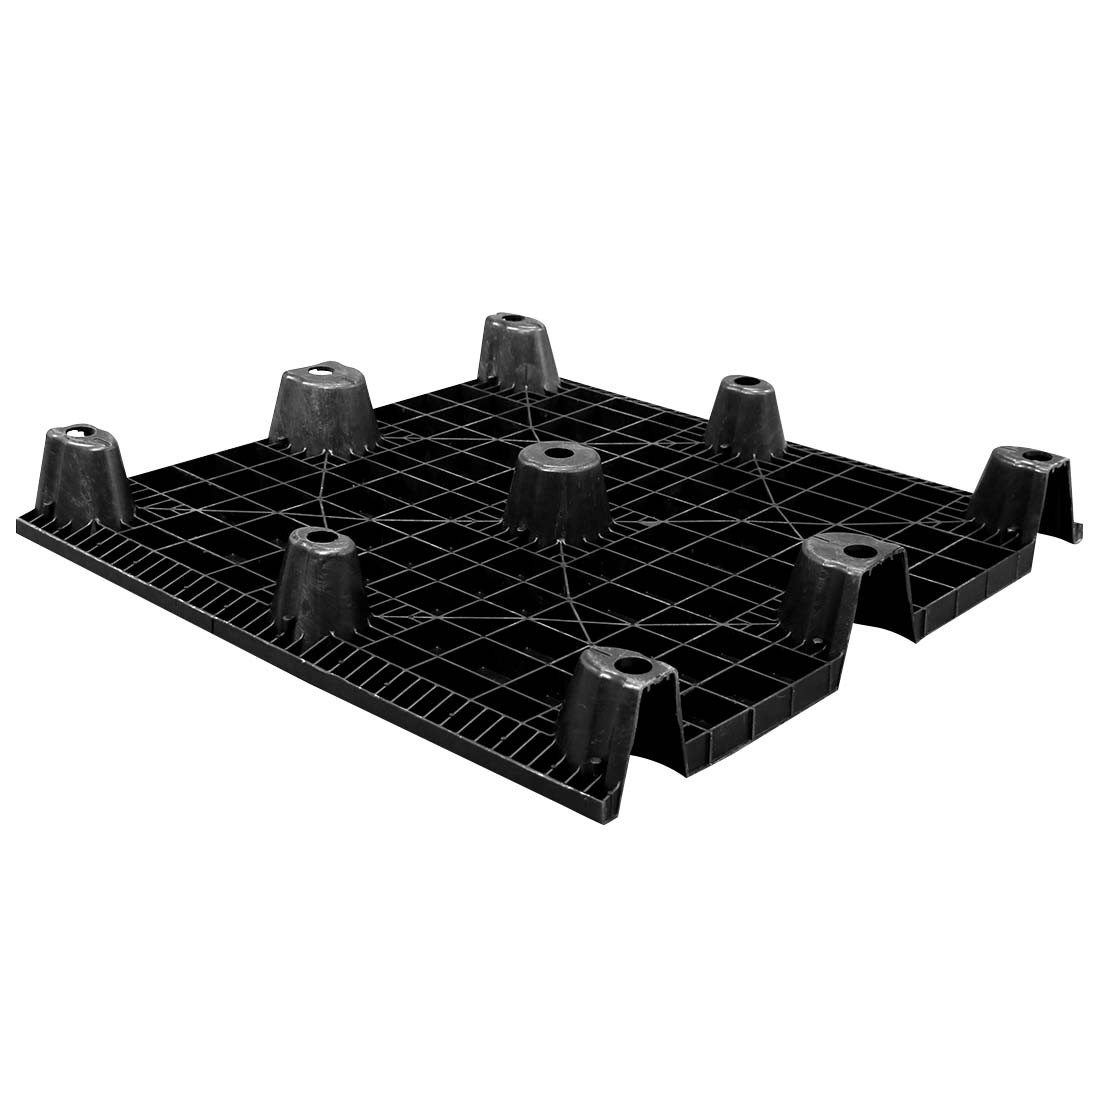 36 x 40 Nestable Solid Deck Plastic Pallet | One Way Solutions # PP-S ...